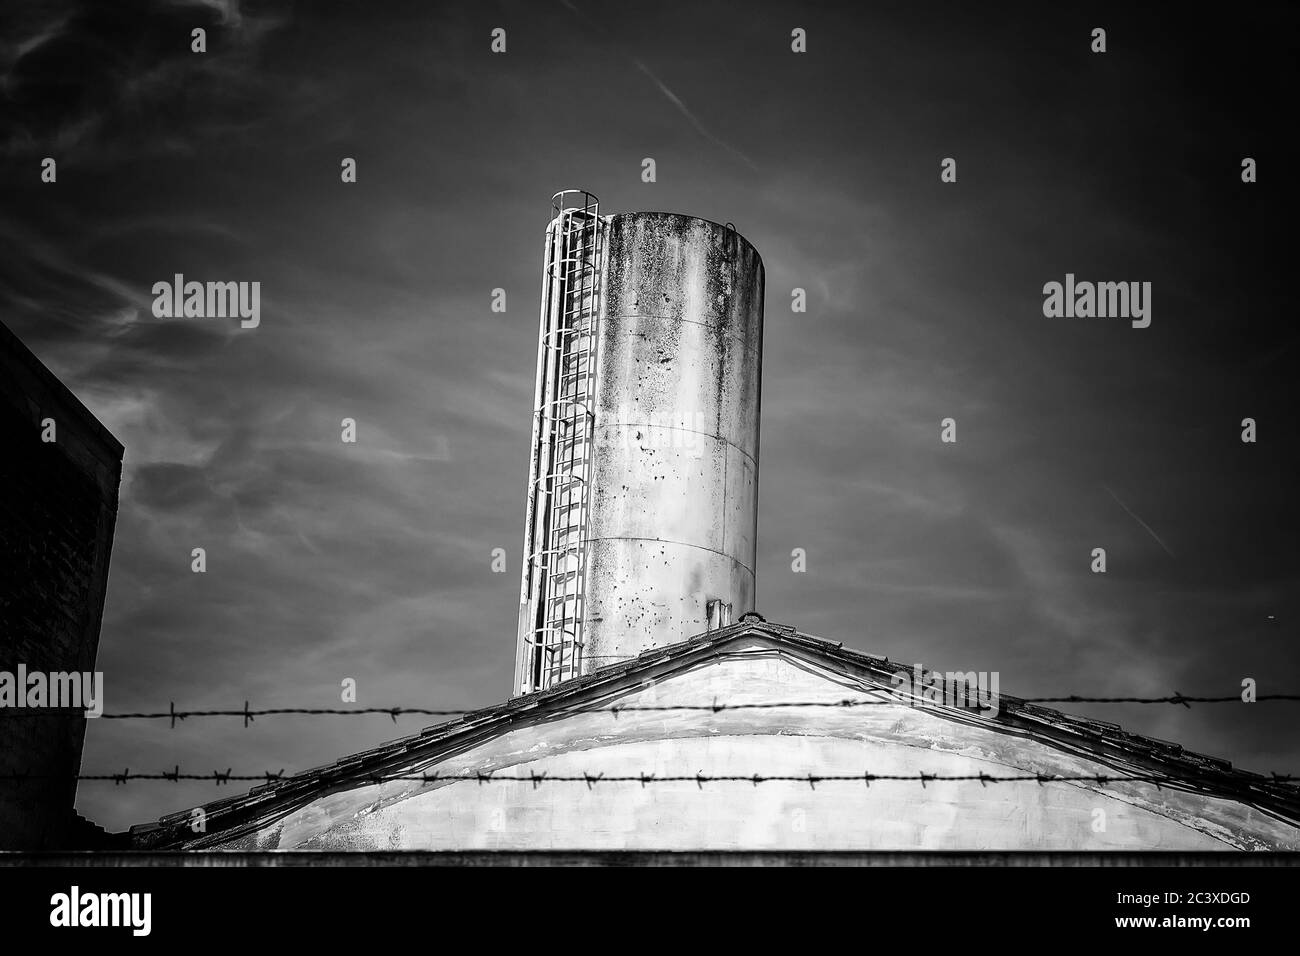 Industrial factory in city, business and finance Stock Photo